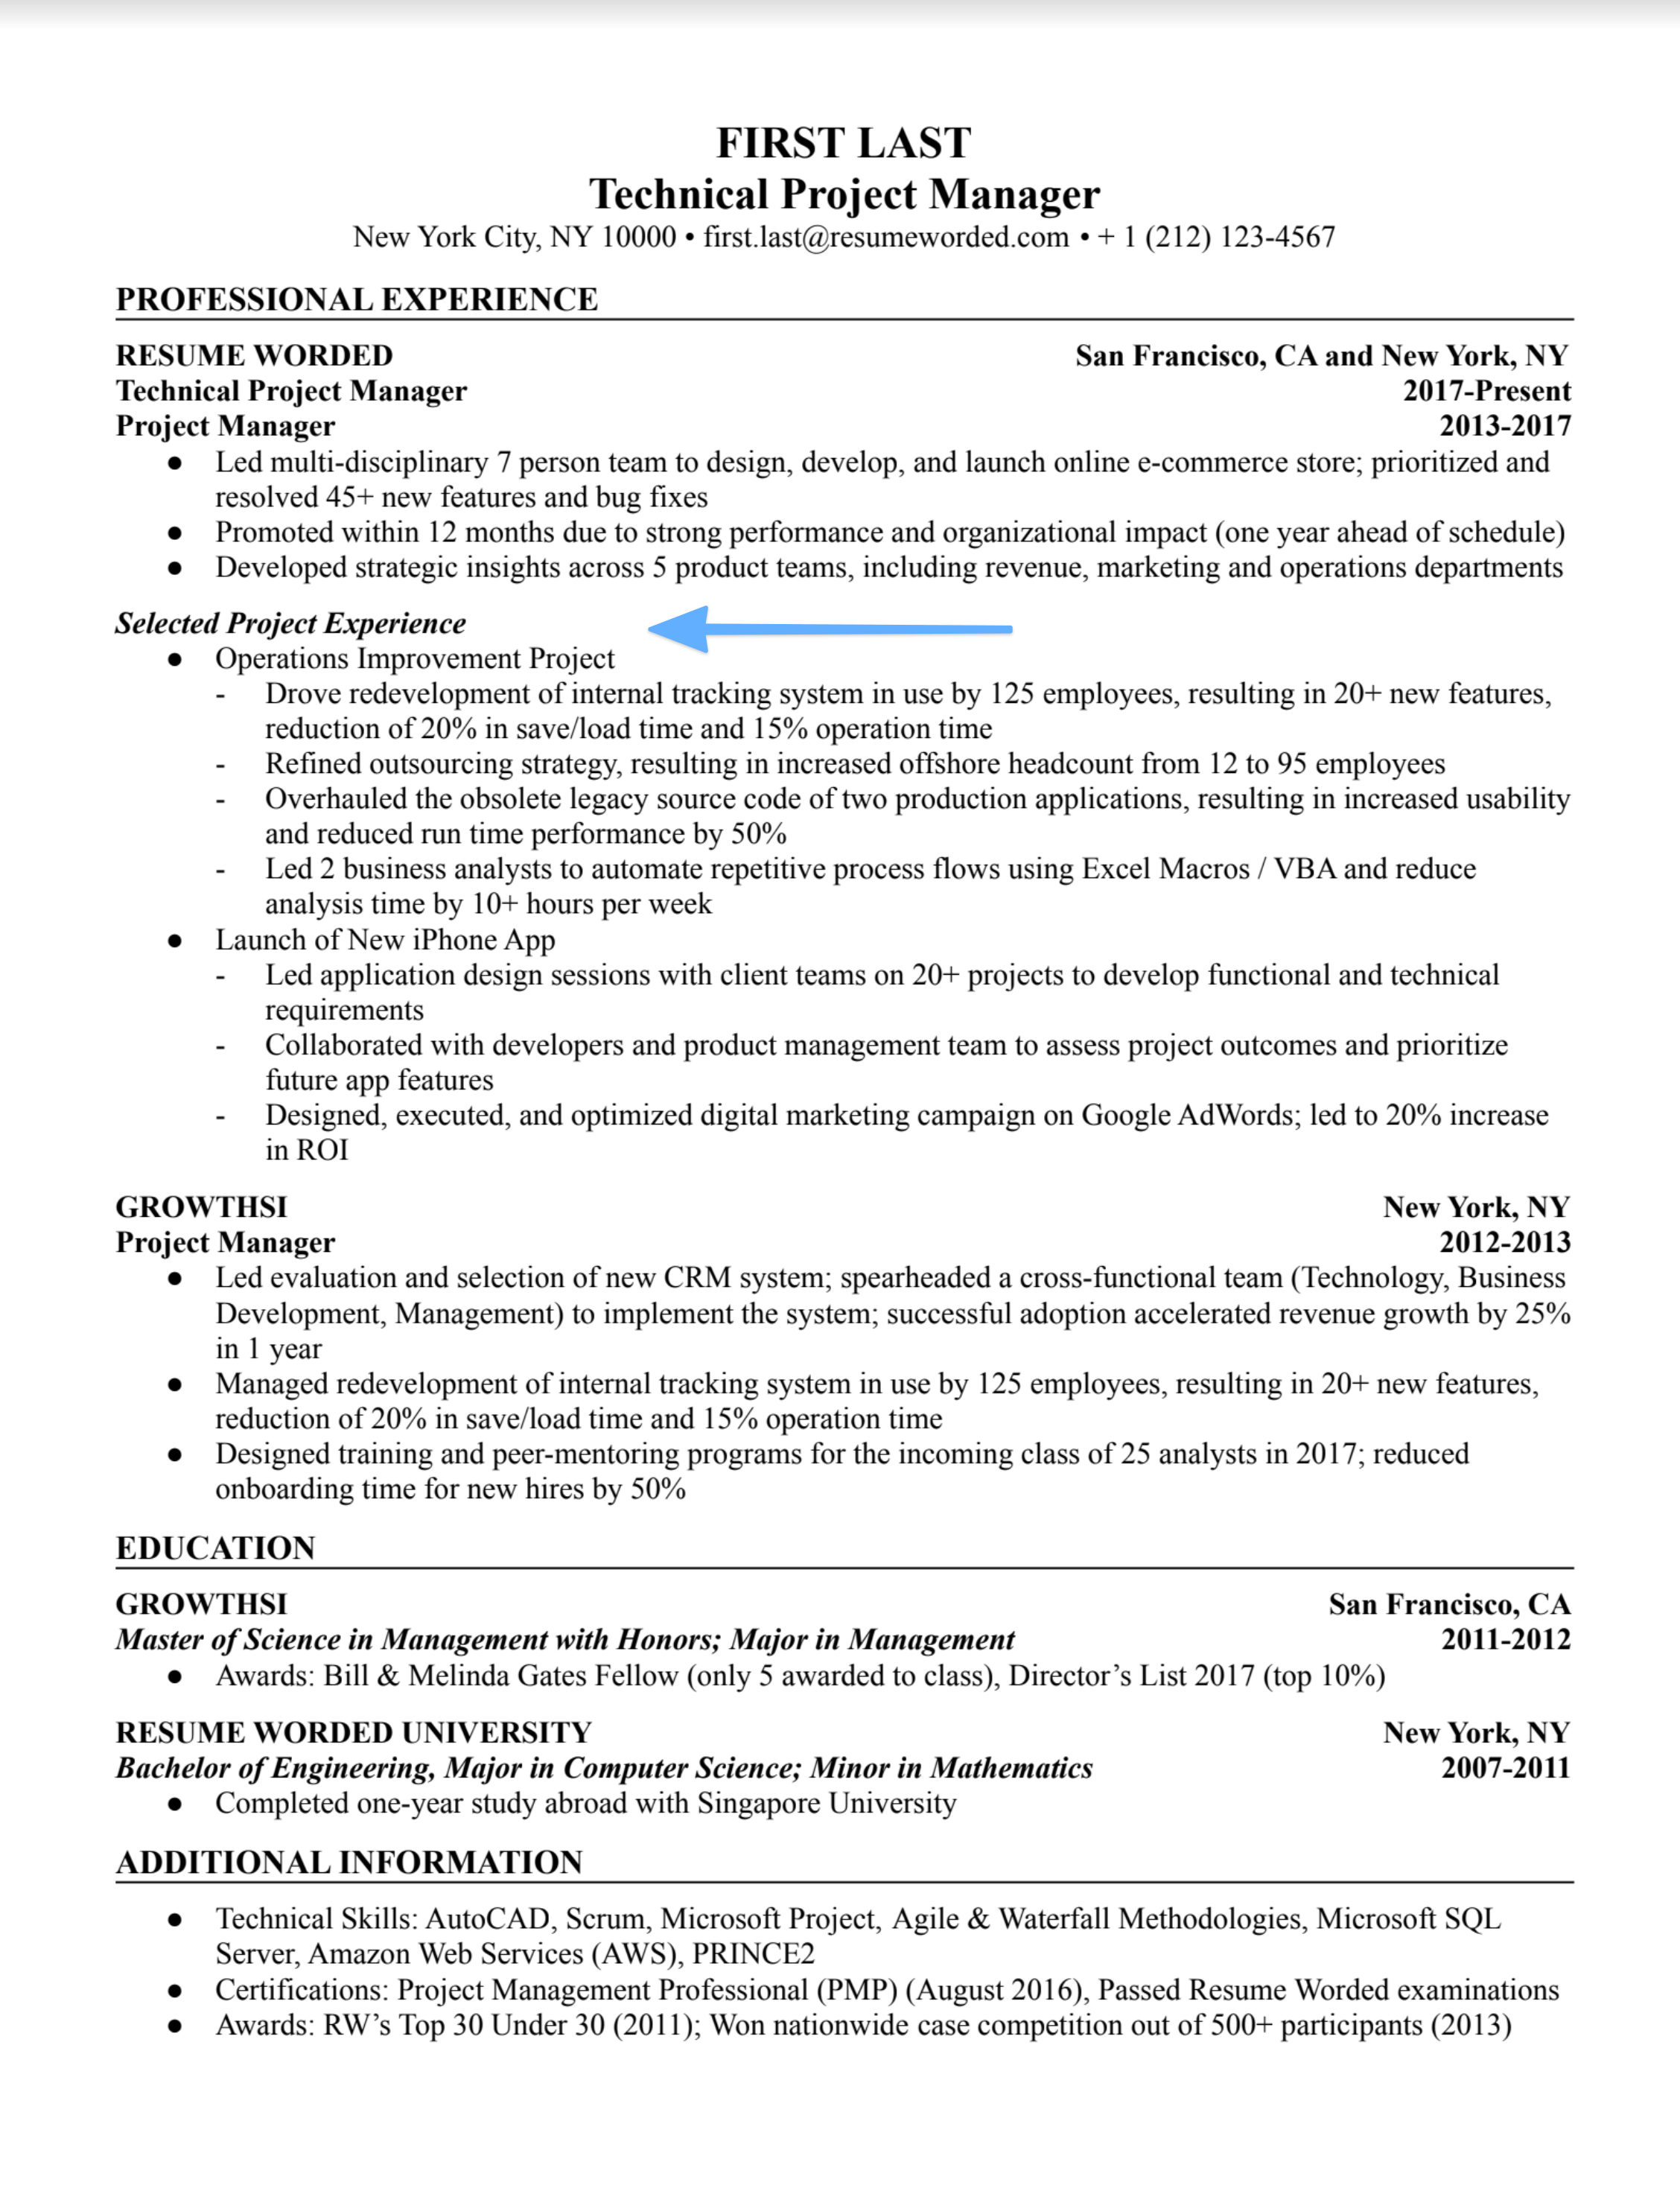 Technical Project Manager Resume Sample